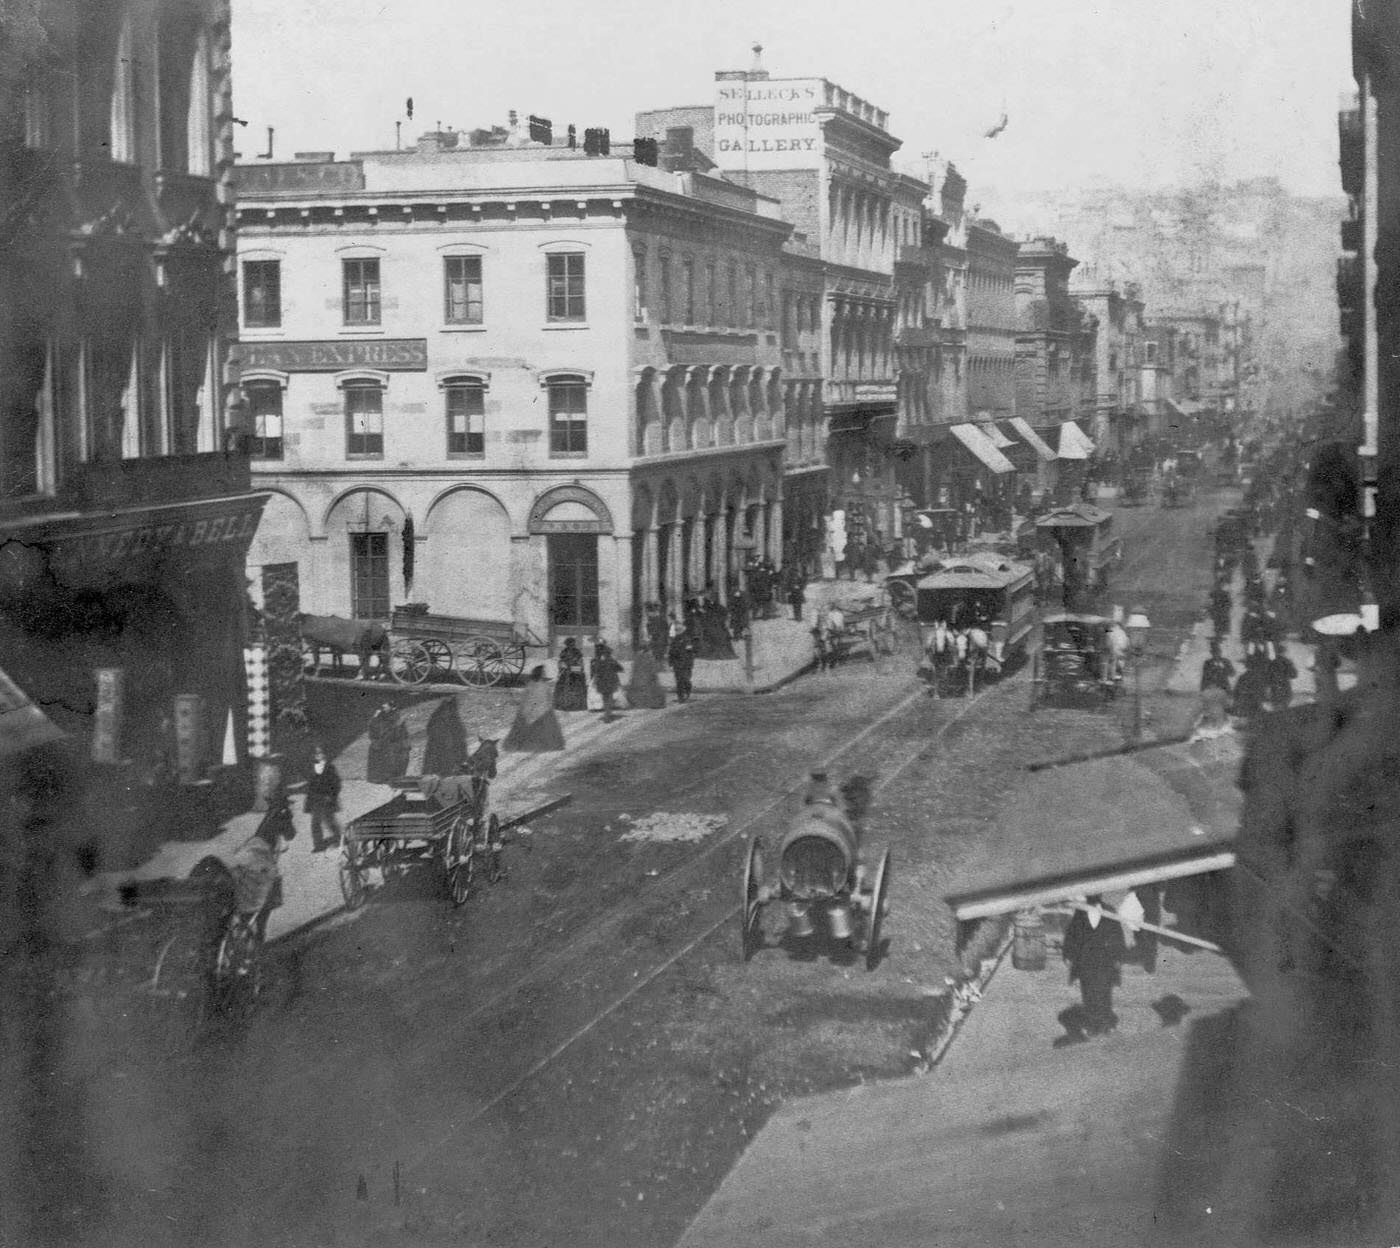 Wagon and Cable Car Traffic on Montgomery Street, San Francisco, 1850